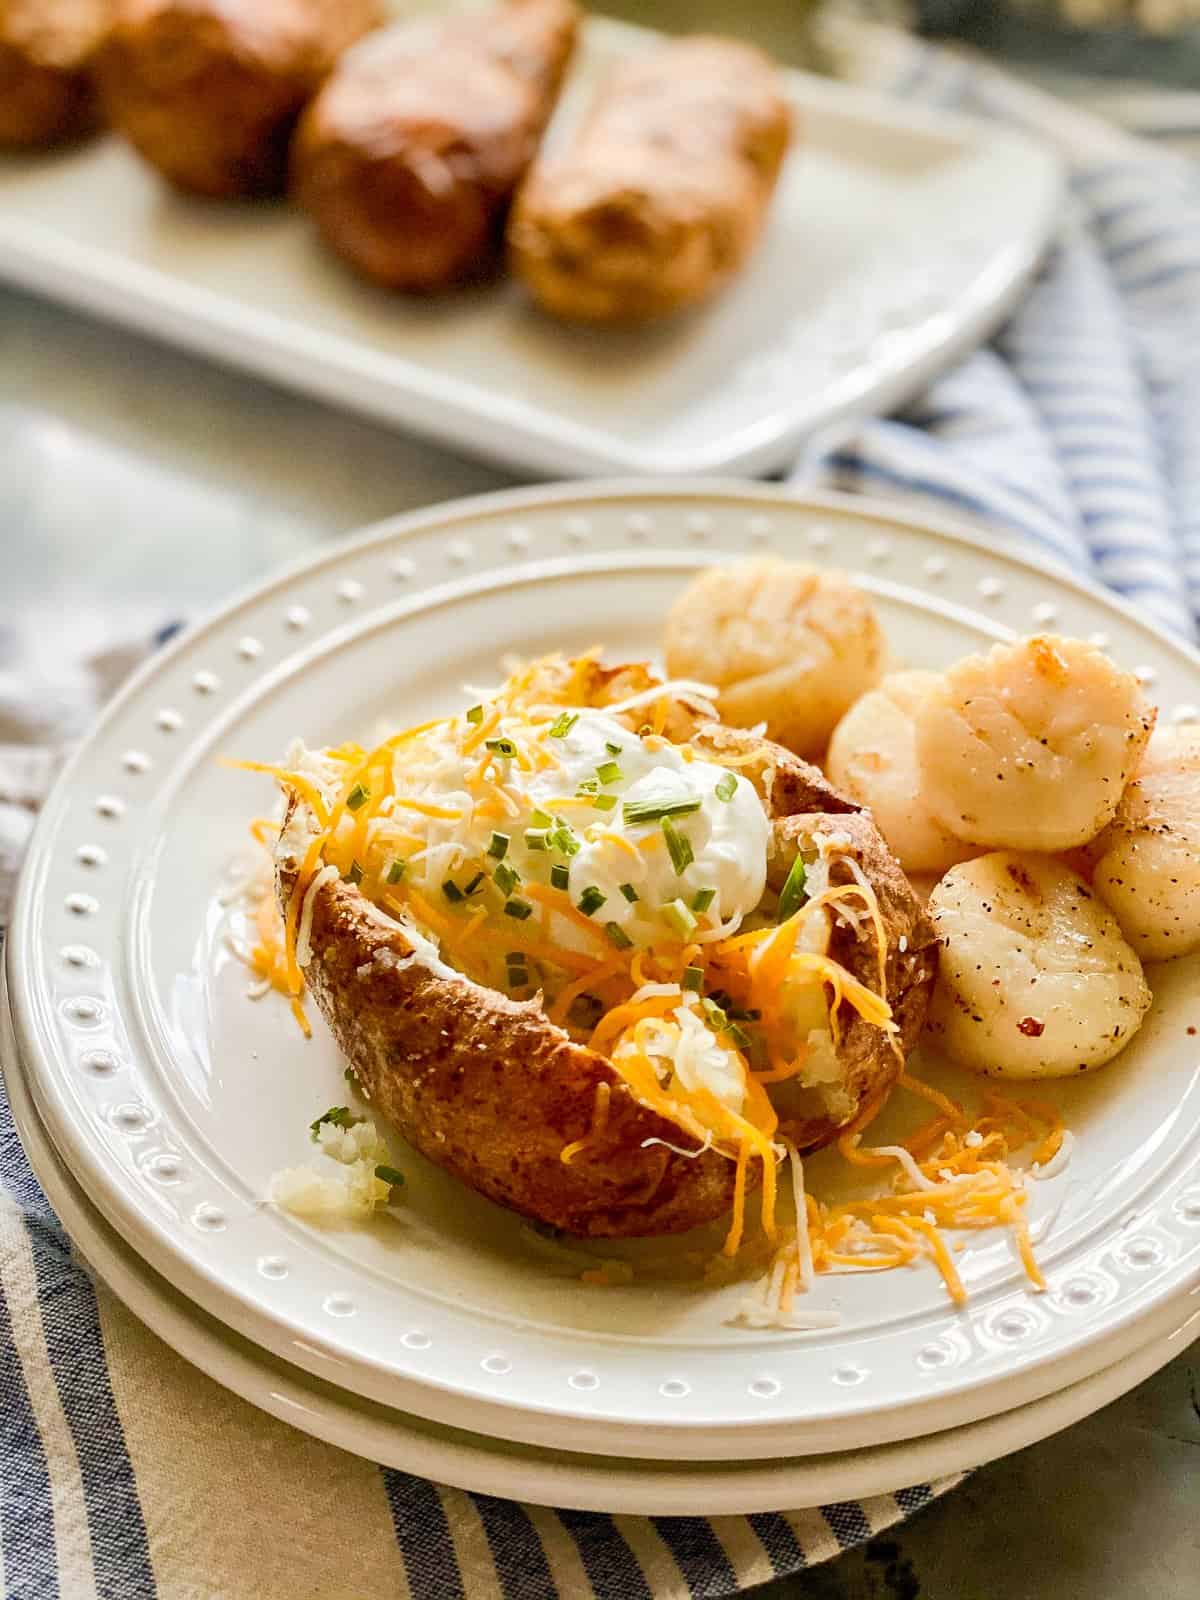 A white plate with a baked potato sliced in the middle and filled with yellow cheese, green scallions, and sour cream. Next to the potato are five scallops.